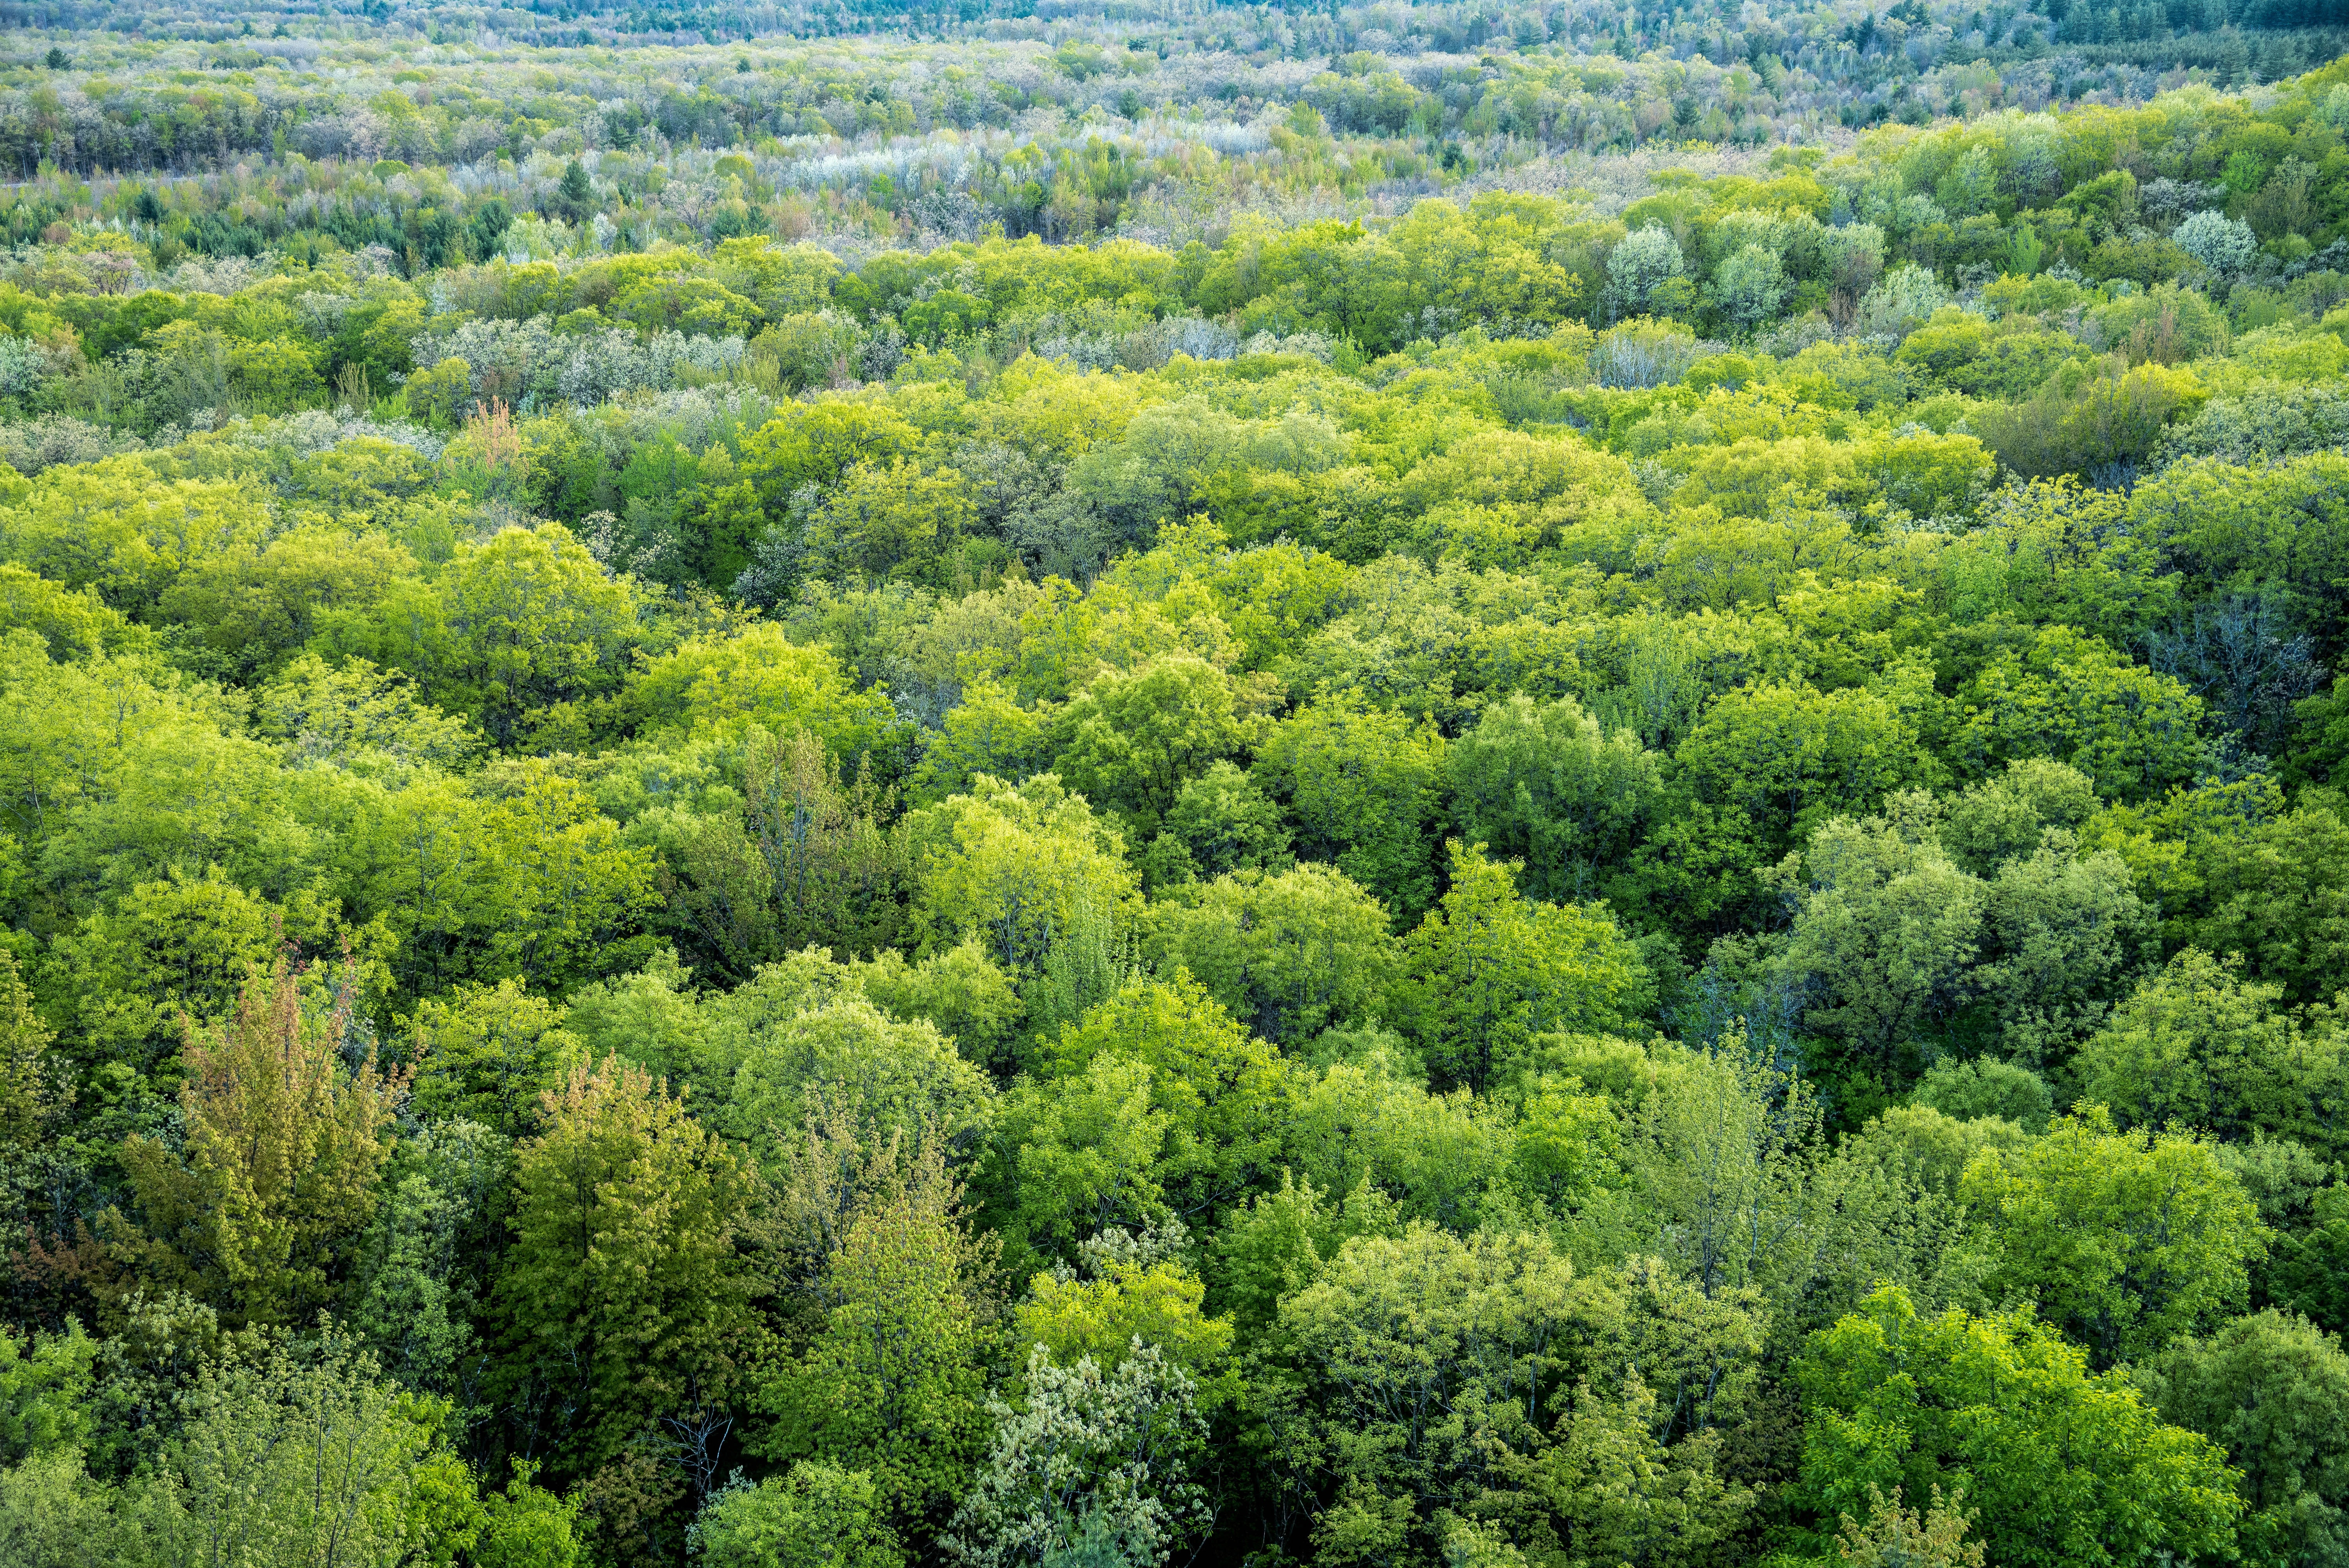 View of the Treetops from Levis Mound image - Free stock photo ...